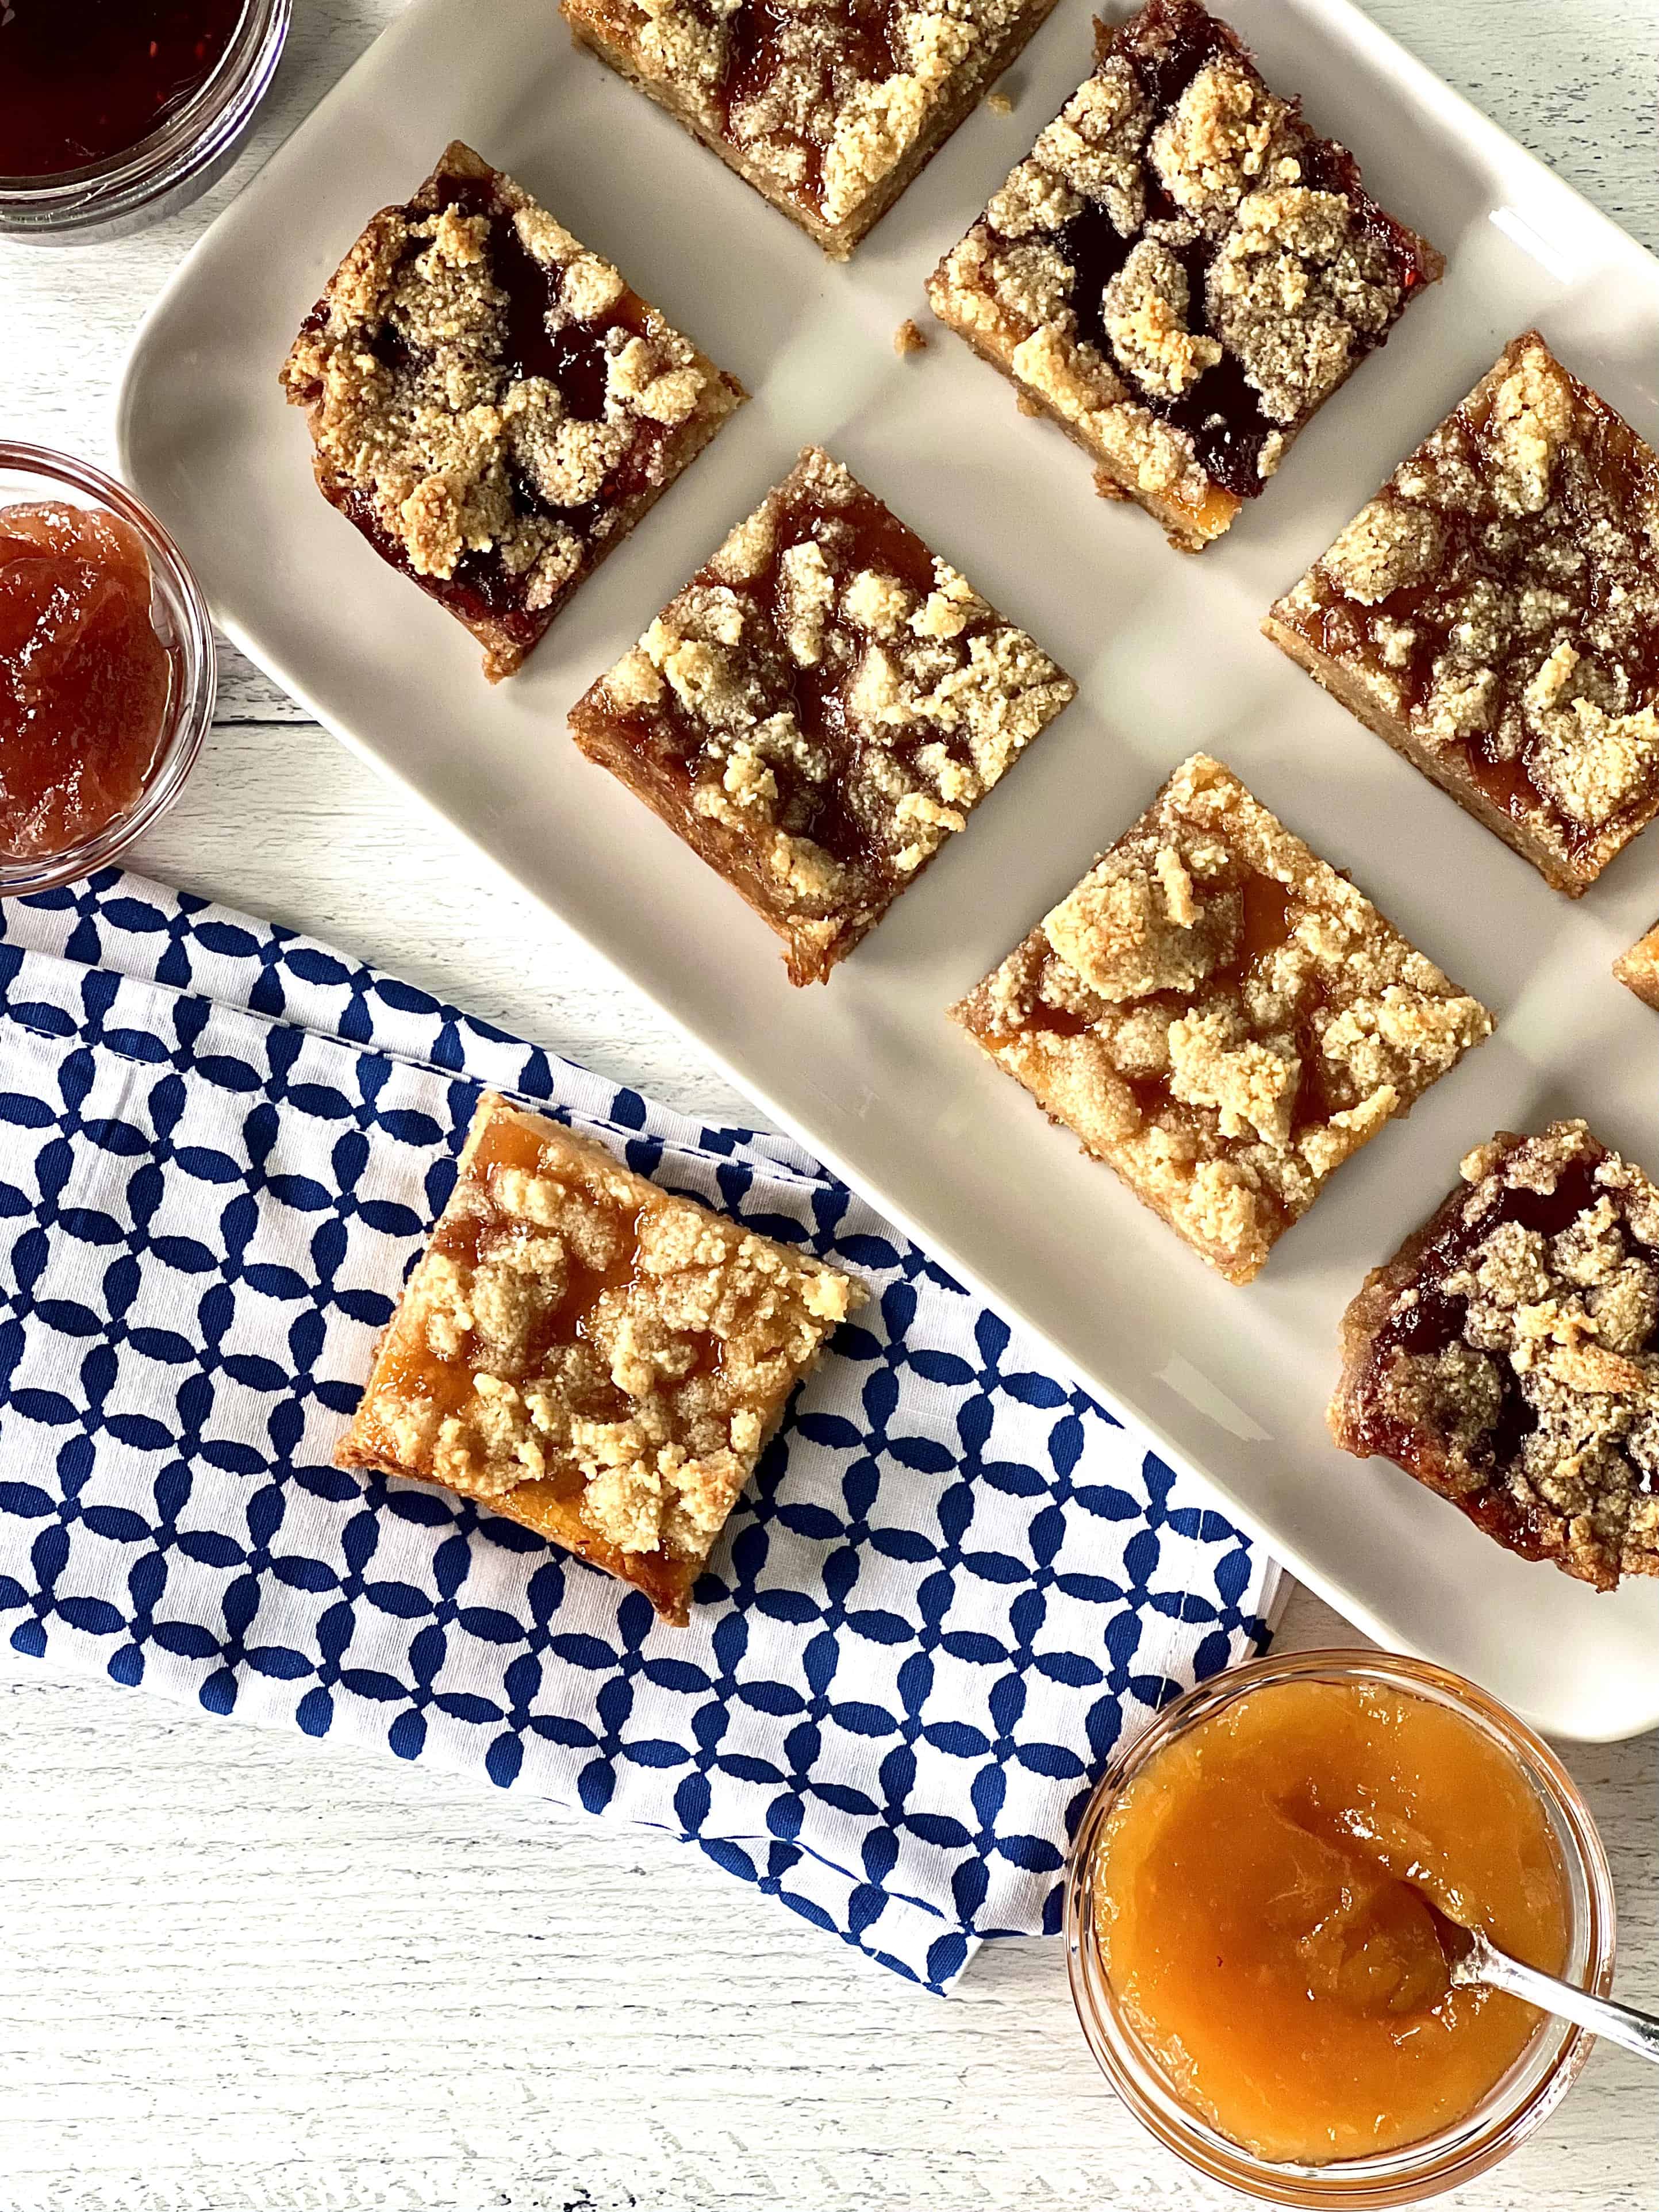 healthy crumble bars arranged on a white rectangular platter and one bar on a blue and white patterned napkin next to bowls of jam